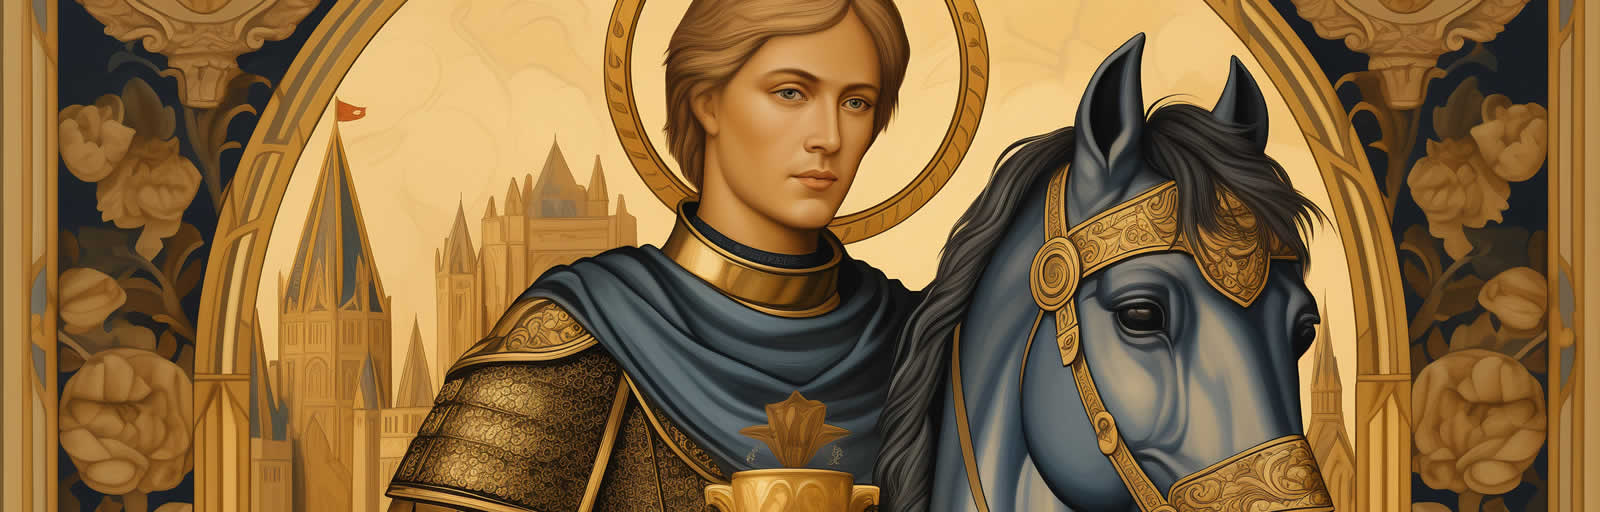 Featured image for “Knight of Cups Meaning”